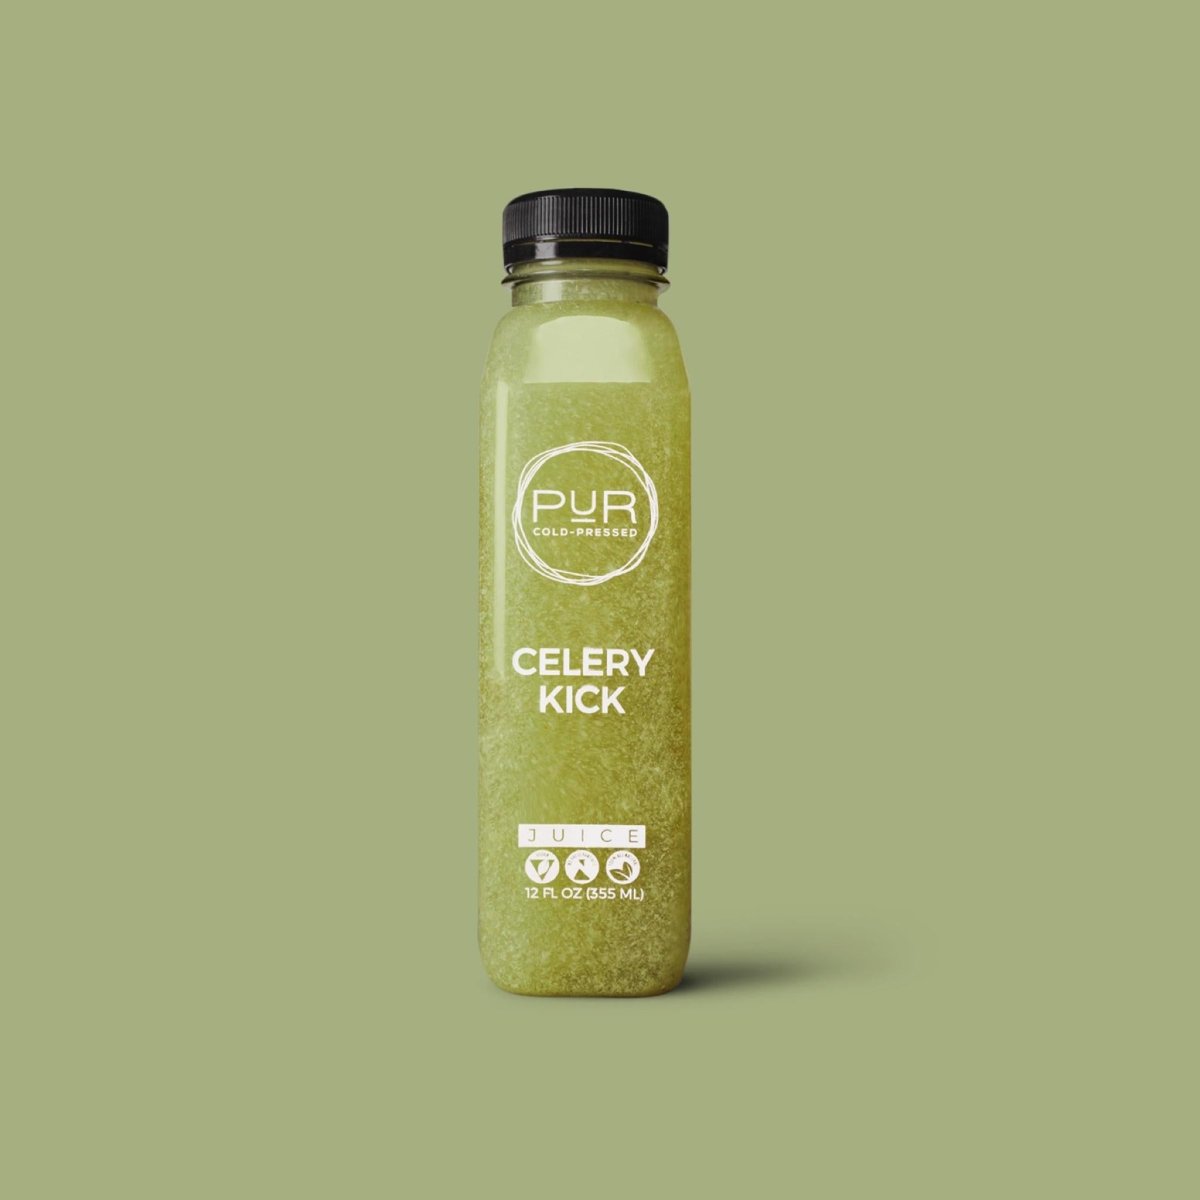 PUR juice cleanse cold pressed juice DISCOVERY - JUICE KIT Juice Cleanse Kit - Discovery Kit | Cold-Pressed Juice | PUR Juice Kit